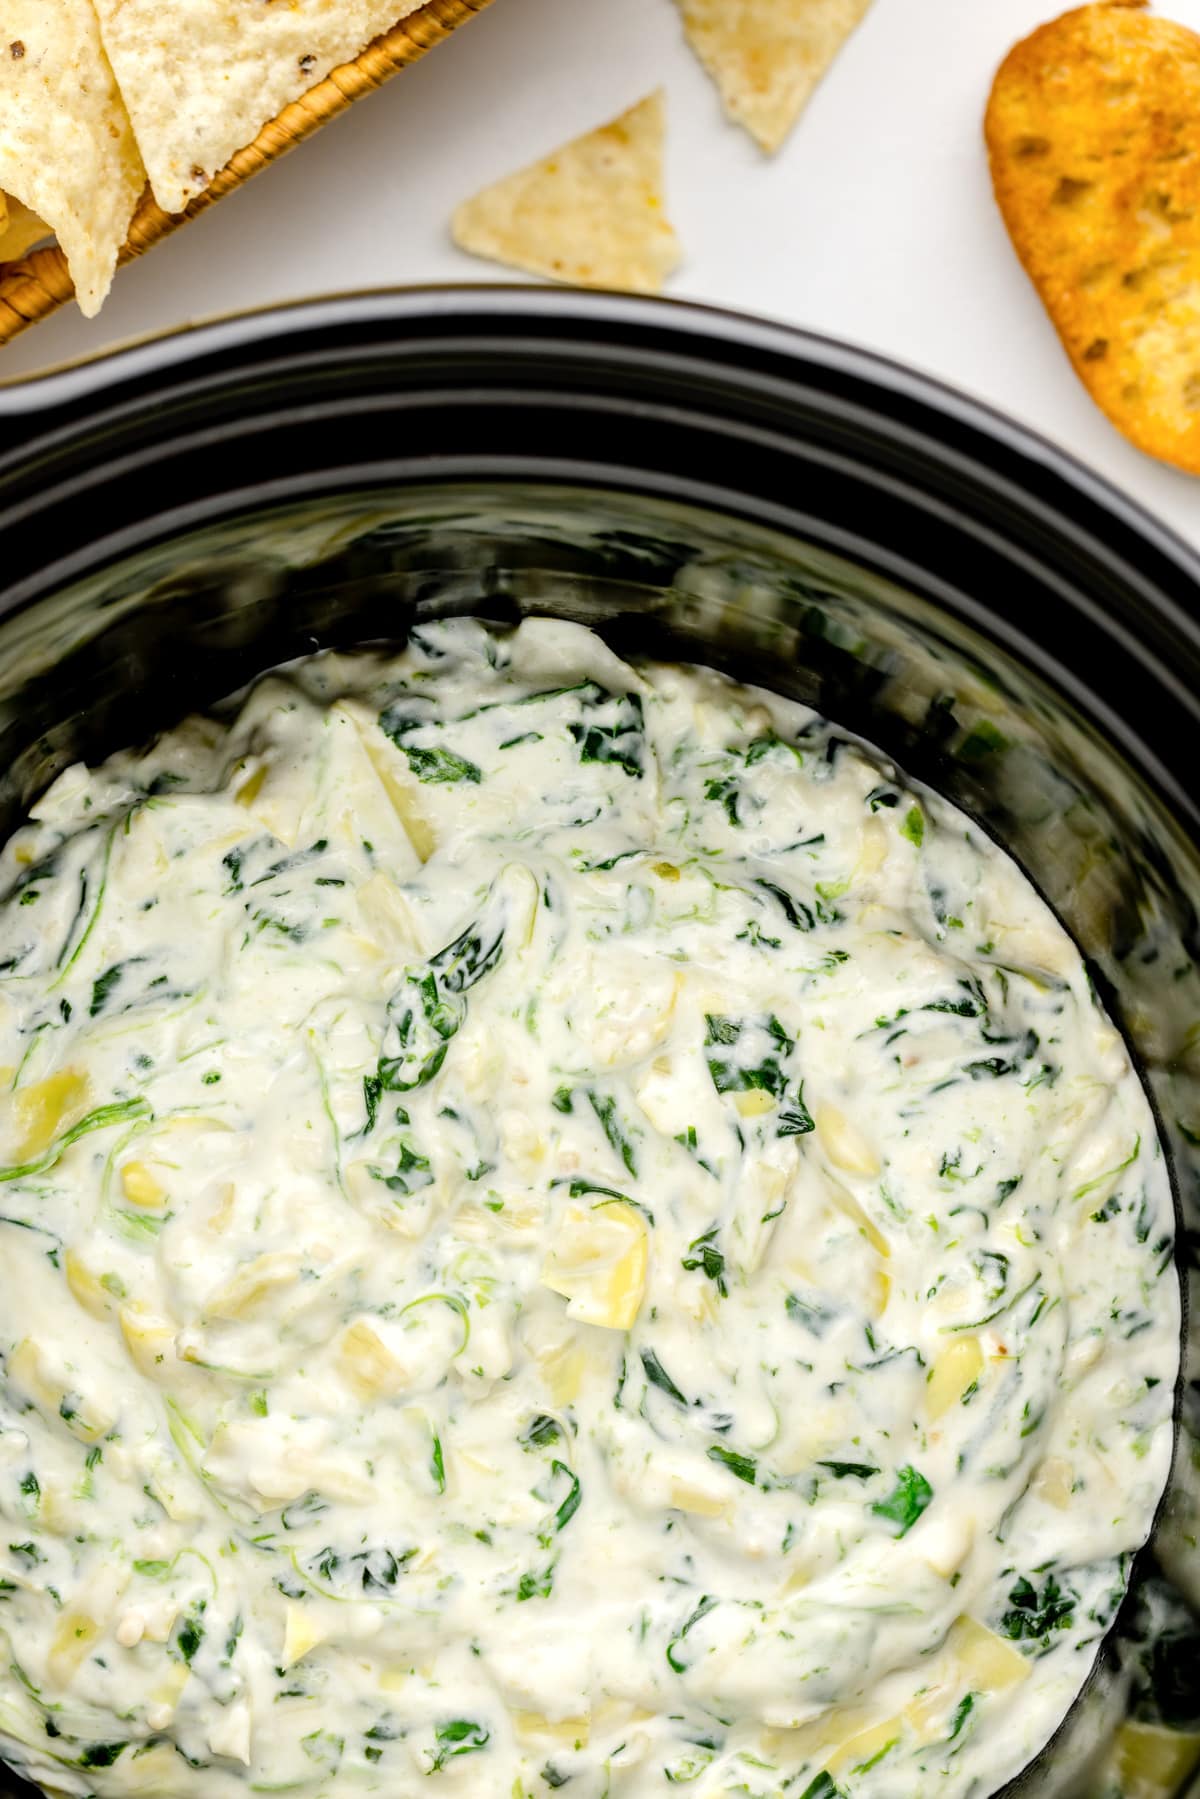 12 Best Slow Cooker Dip Recipes for the Super Bowl - Slow Cooker Spinach  Artichoke Dip